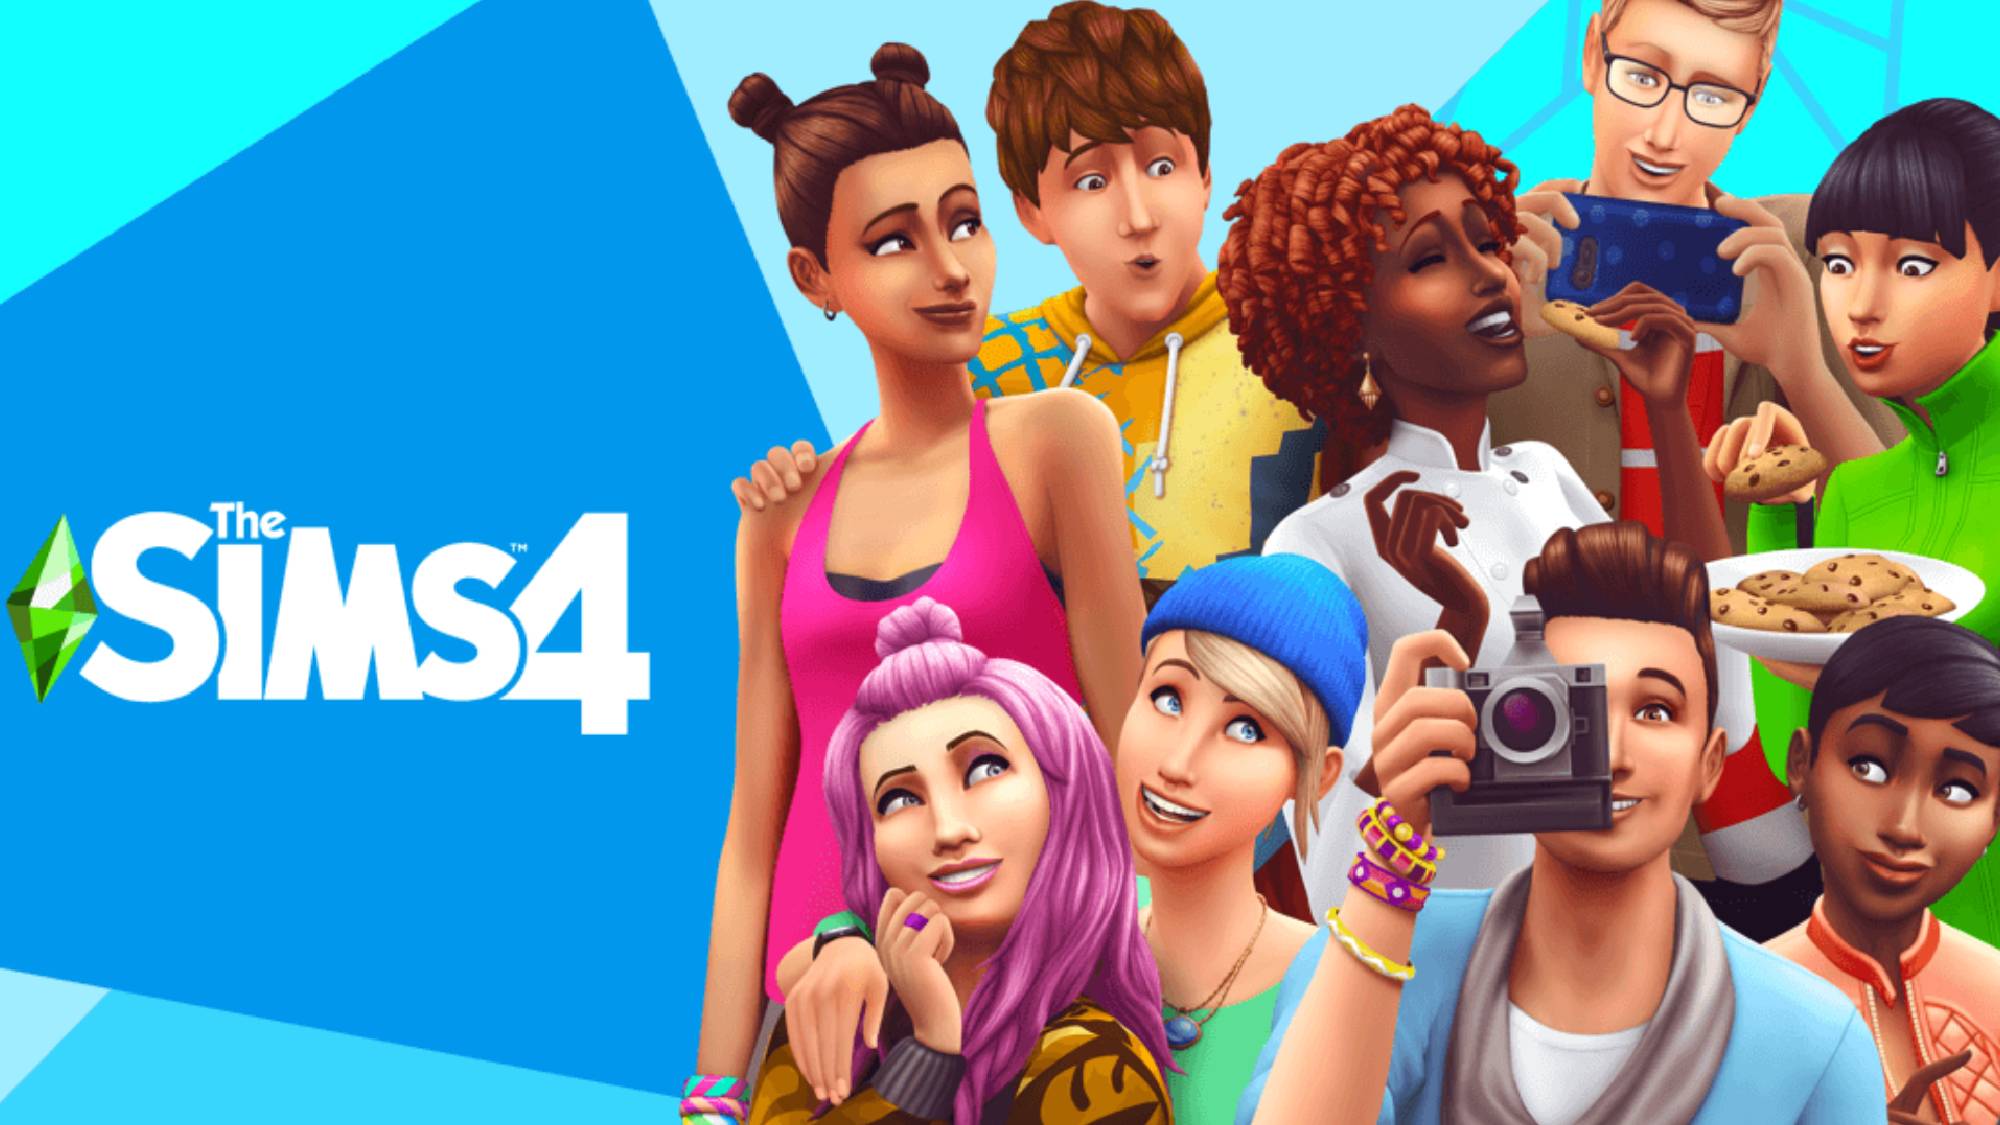 How to Download The Sims 4 Game on PC & Laptop for FREE - 100% Legal 